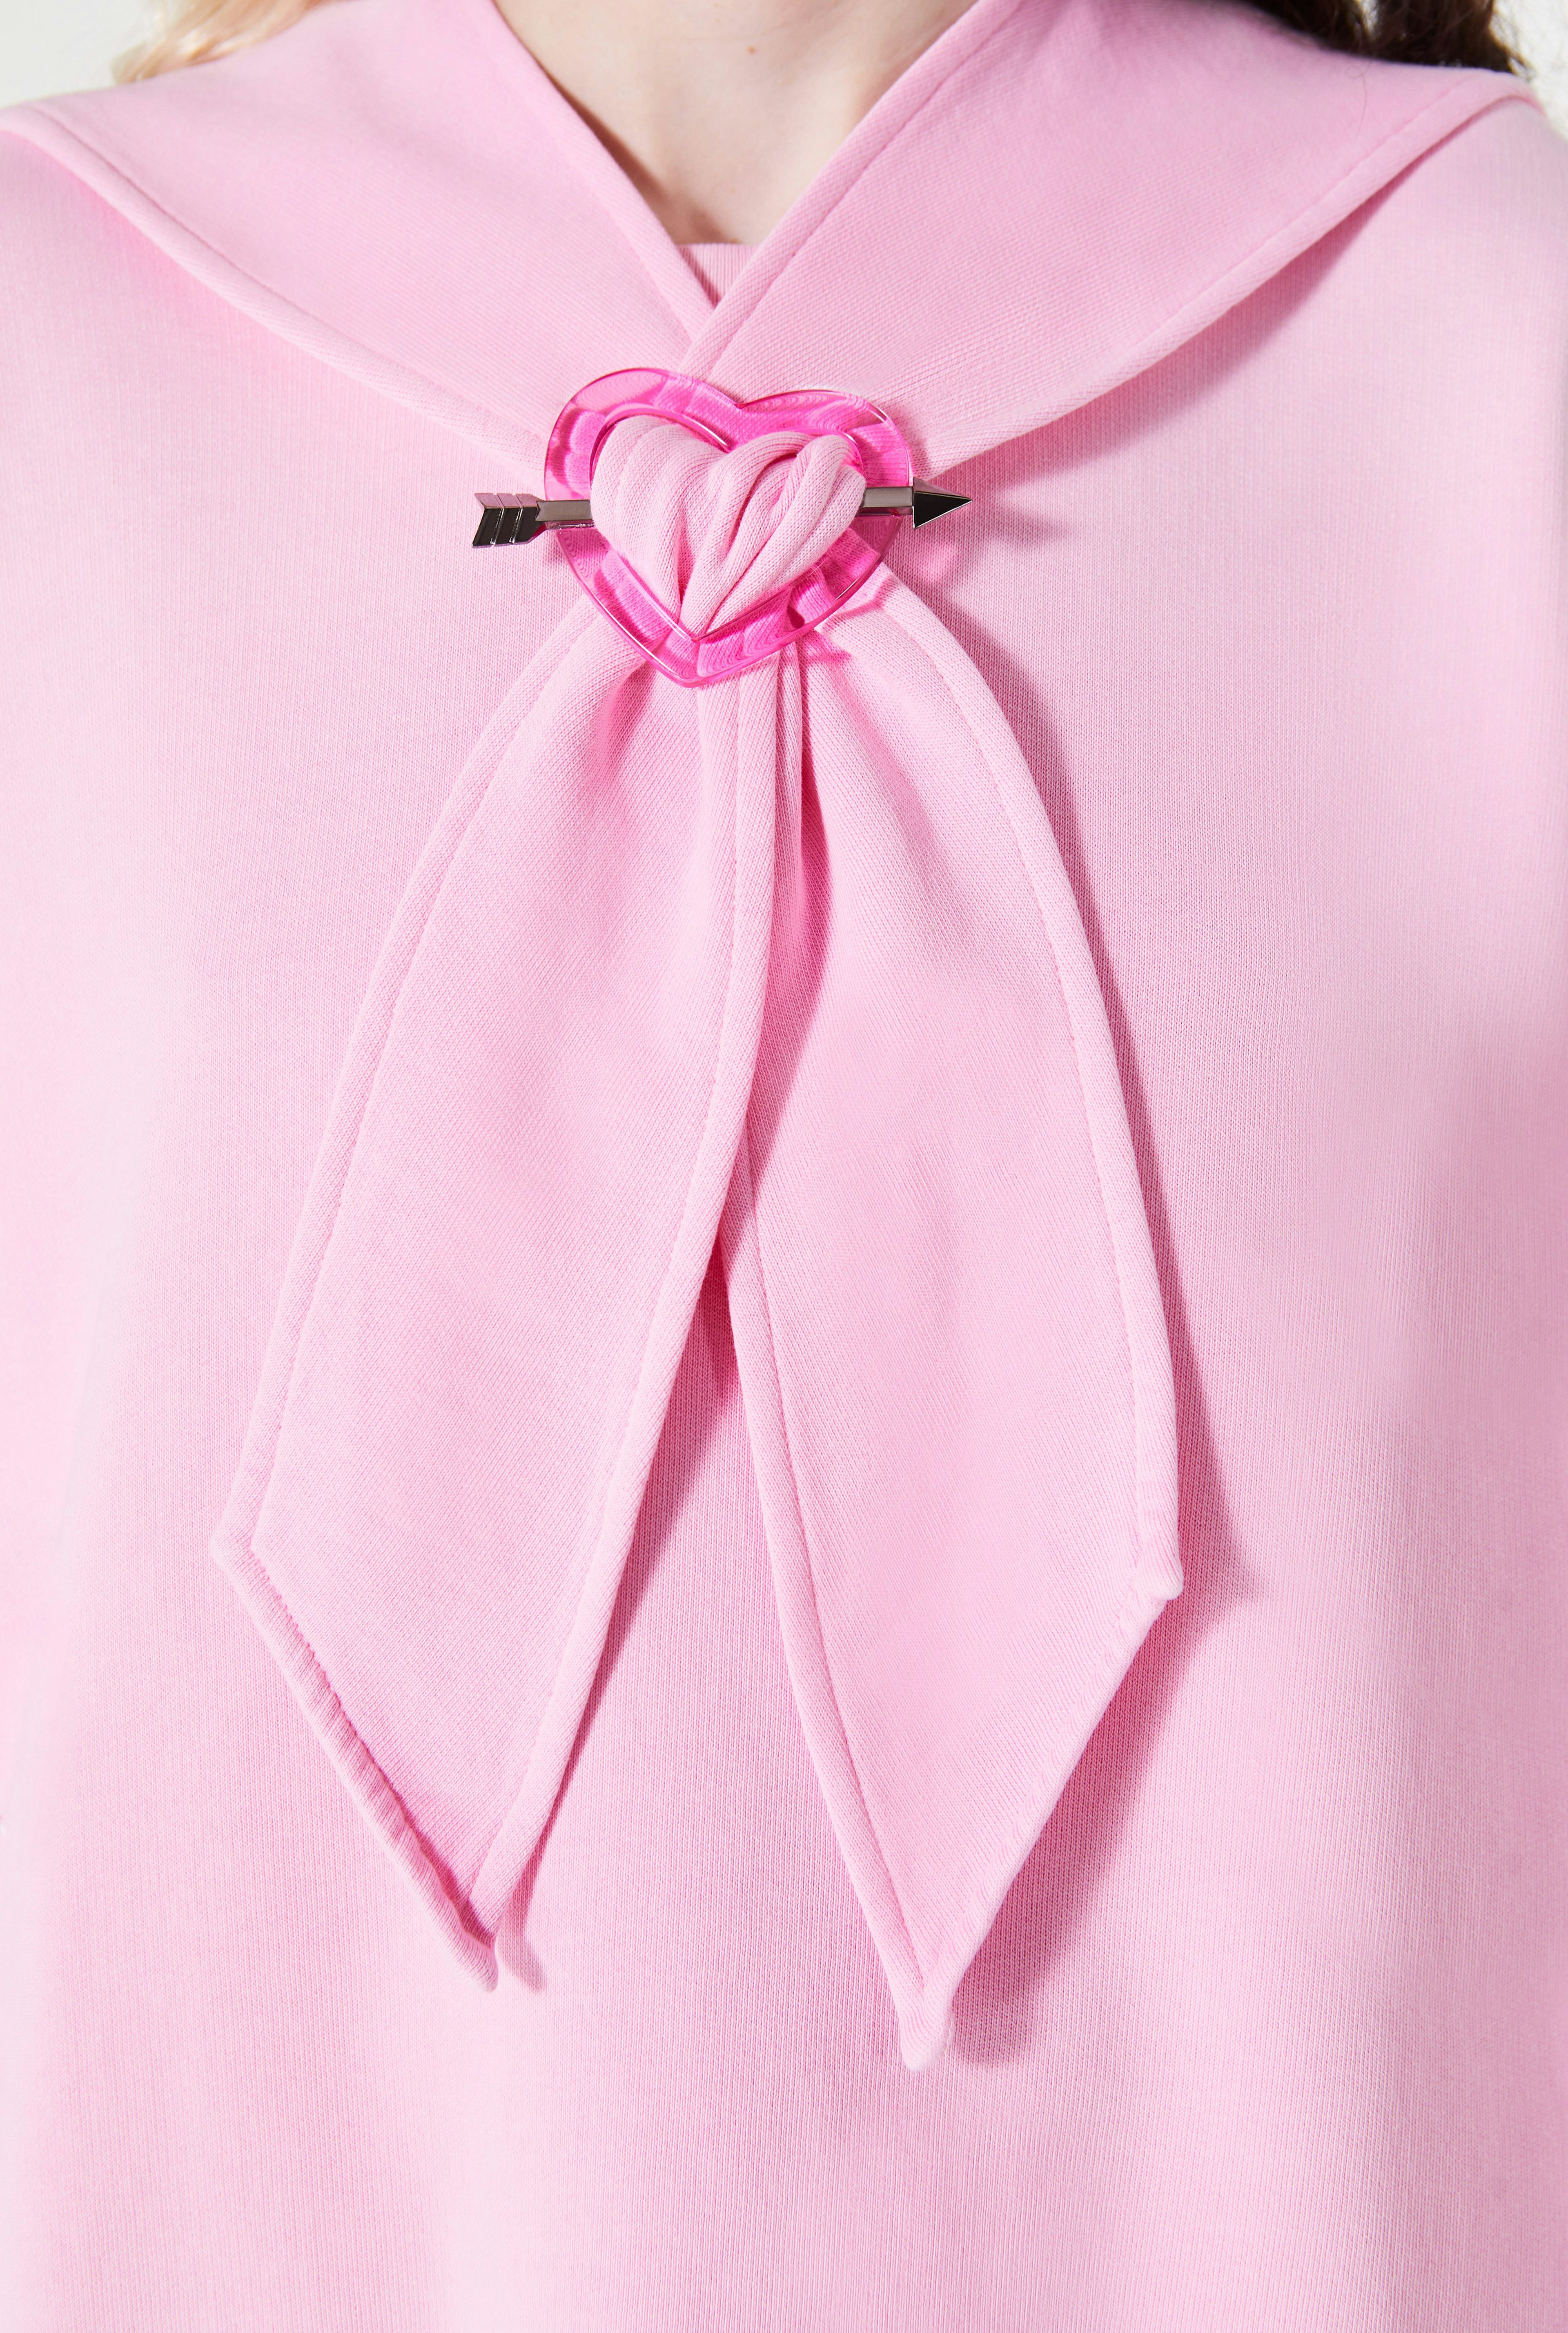 Exclusive - The pink Heart Buckle